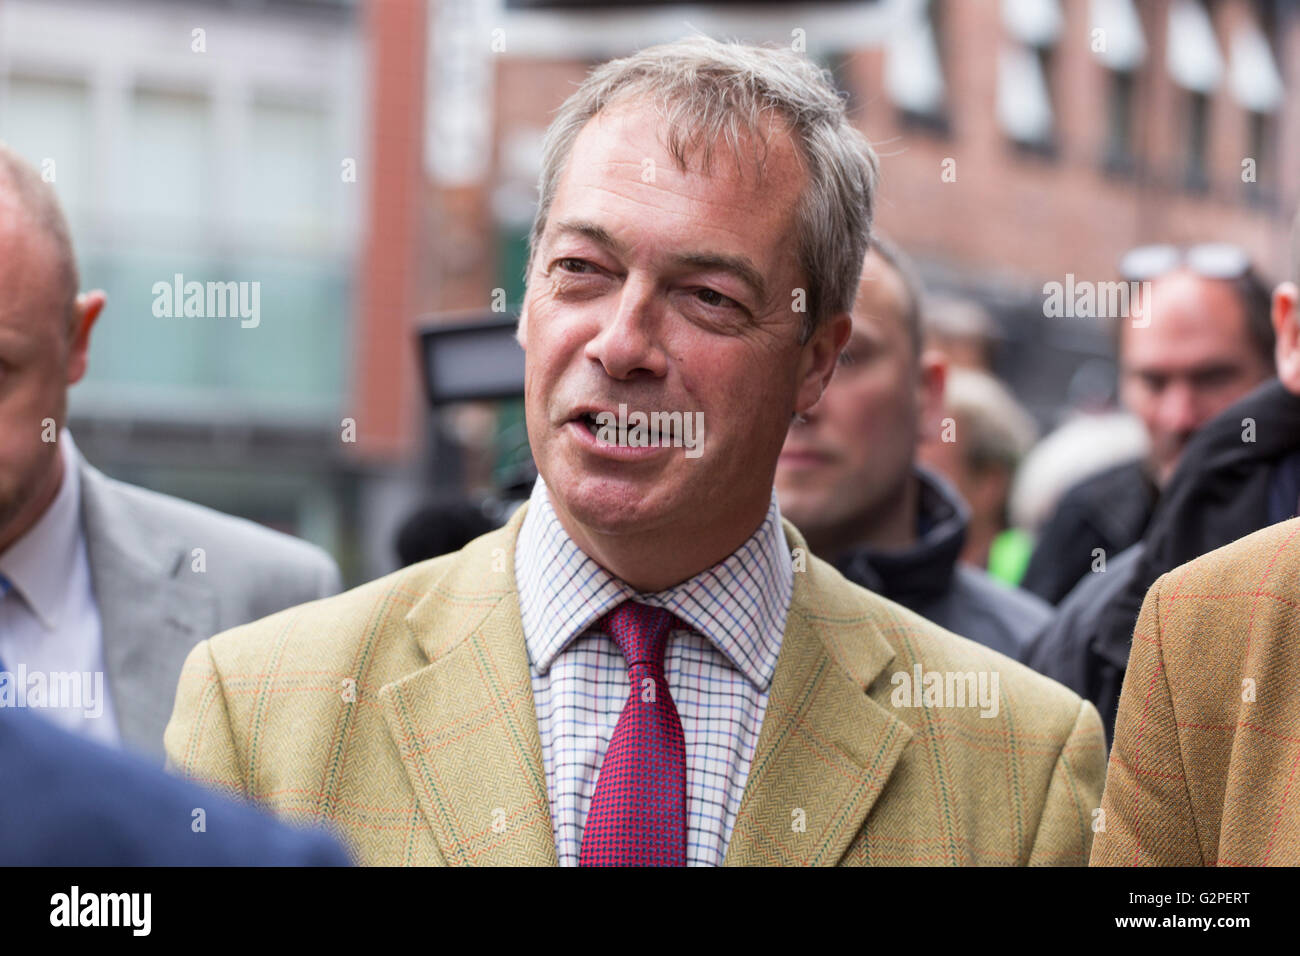 Leeds, West Yorkshire. 1 June 2016. Leader of the UKIP Party and MEP Nigel Farage, pictured in Leeds today as part of the Brexit Bus Tour campaign, West Yorkshire, on 1 June 2016. Credit:  Harry Whitehead/Alamy Live News Stock Photo